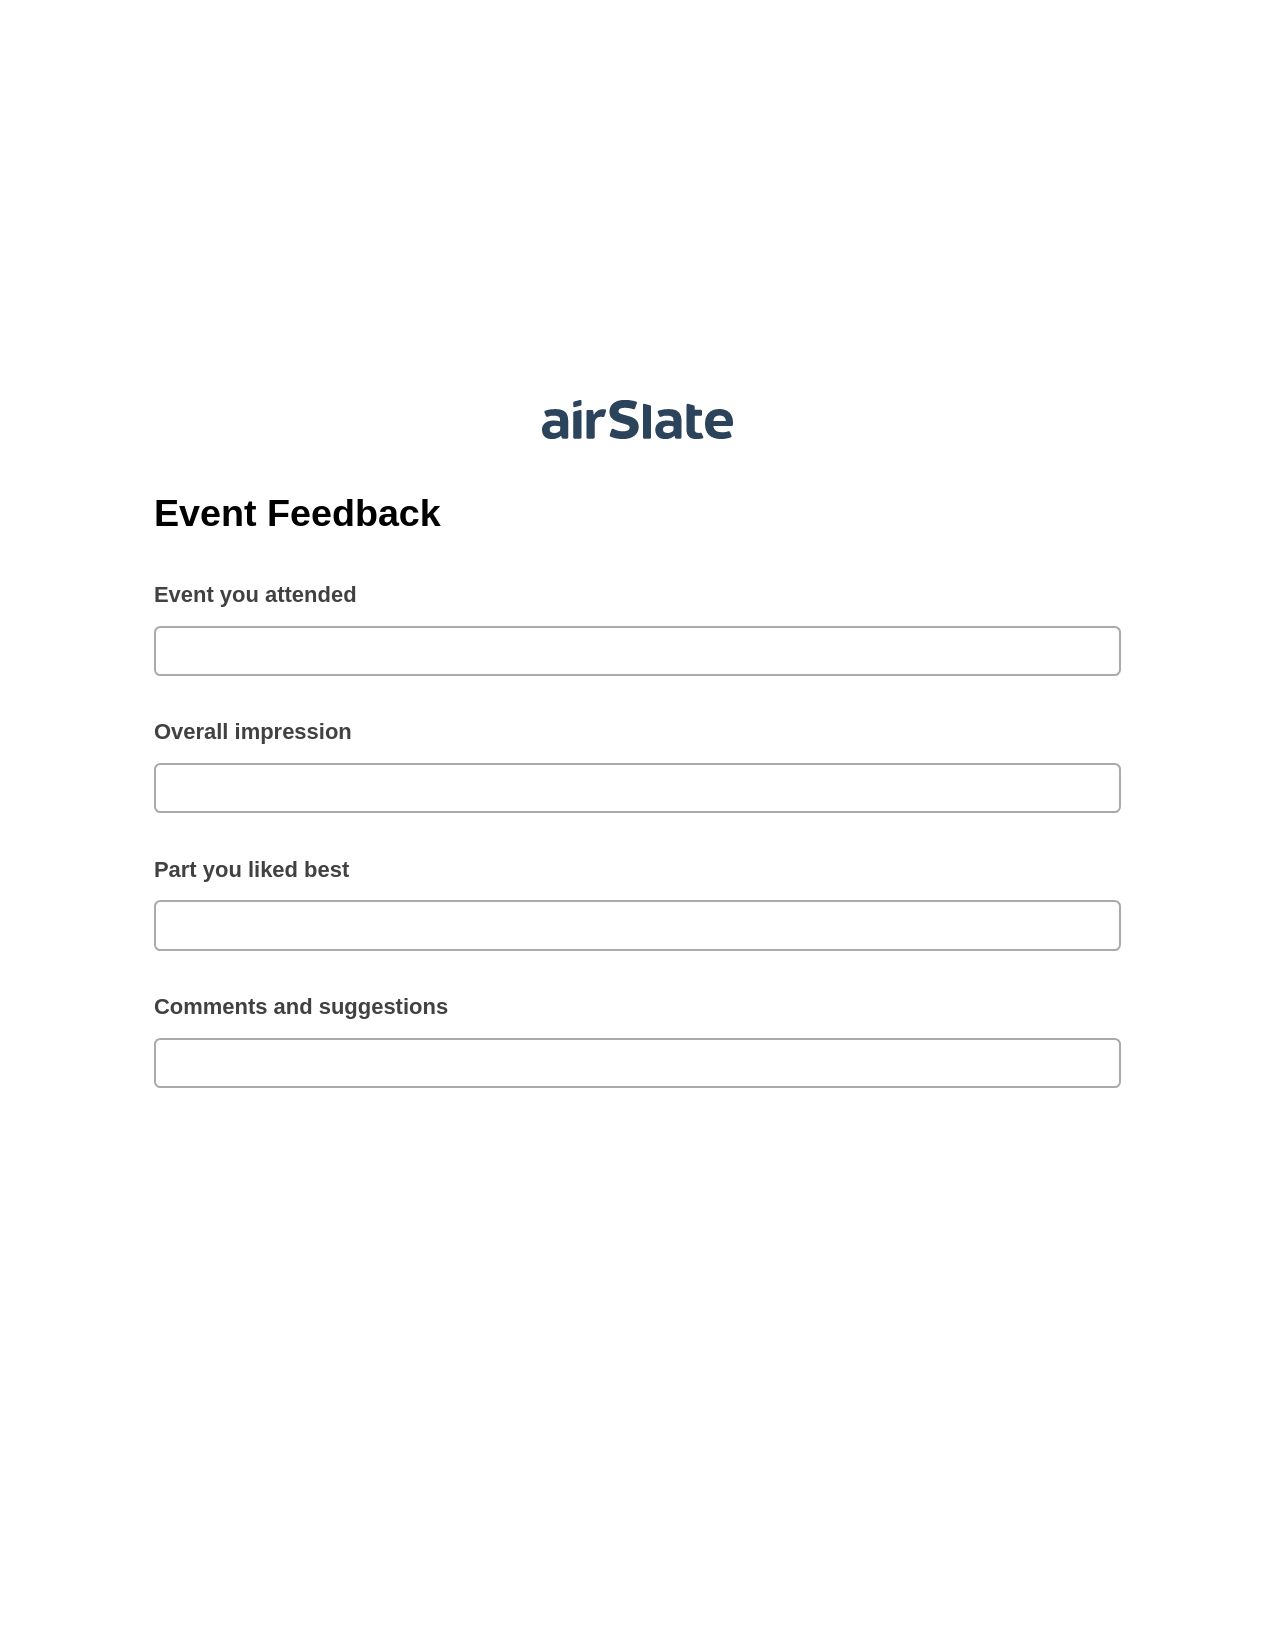 Event Feedback Pre-fill from another Slate Bot, Reminder Bot, Webhook Postfinish Bot